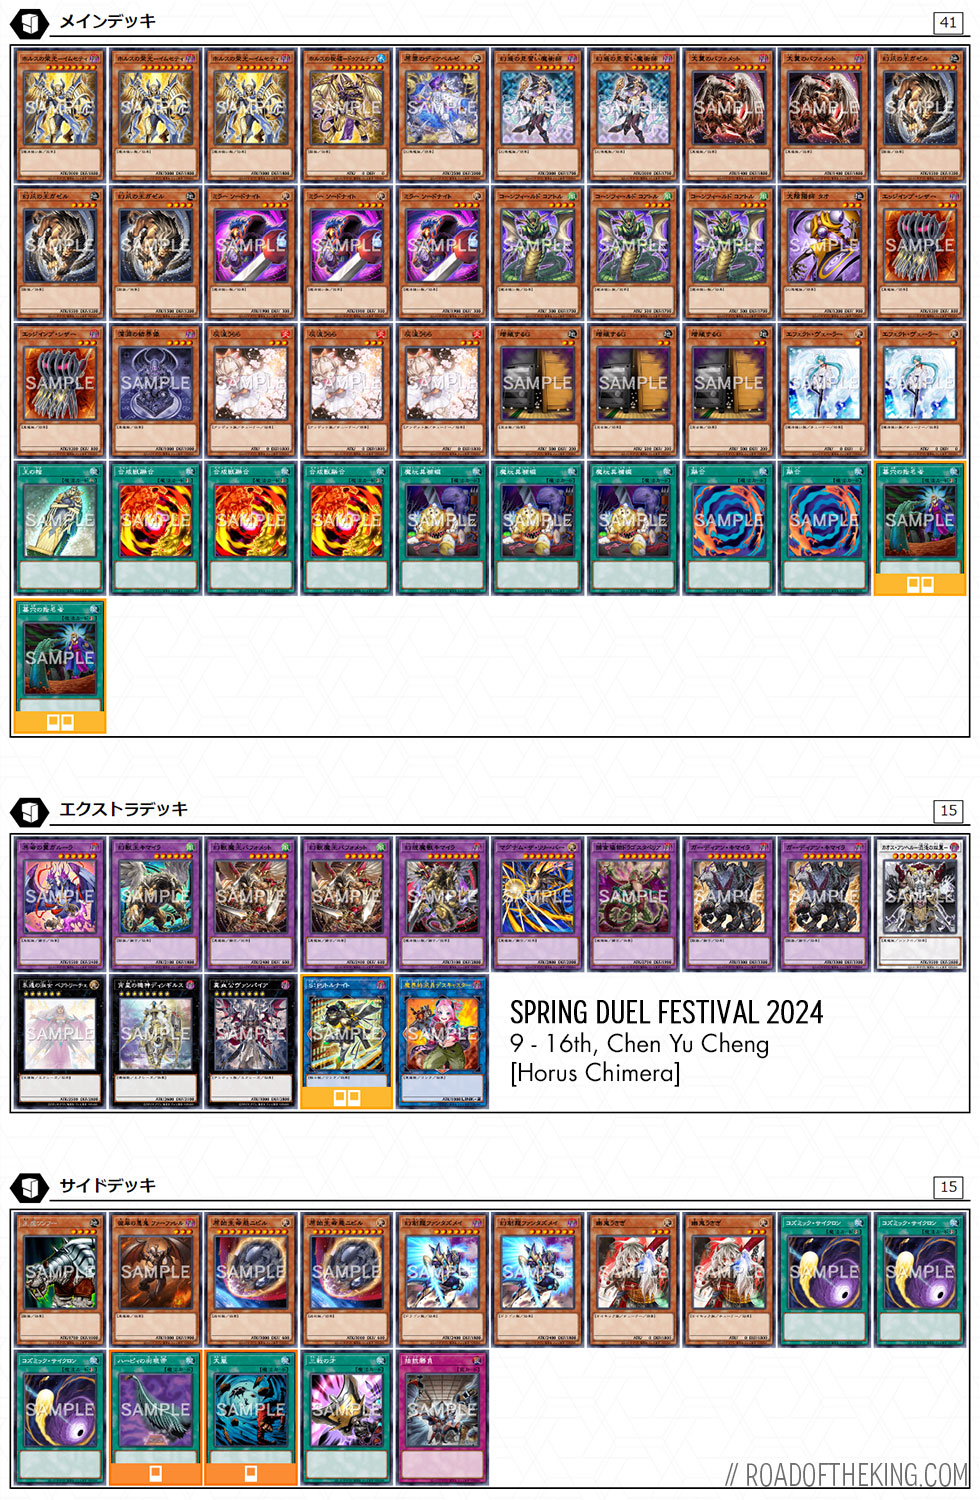 Spring Duel Festival 2024 | Road of the King